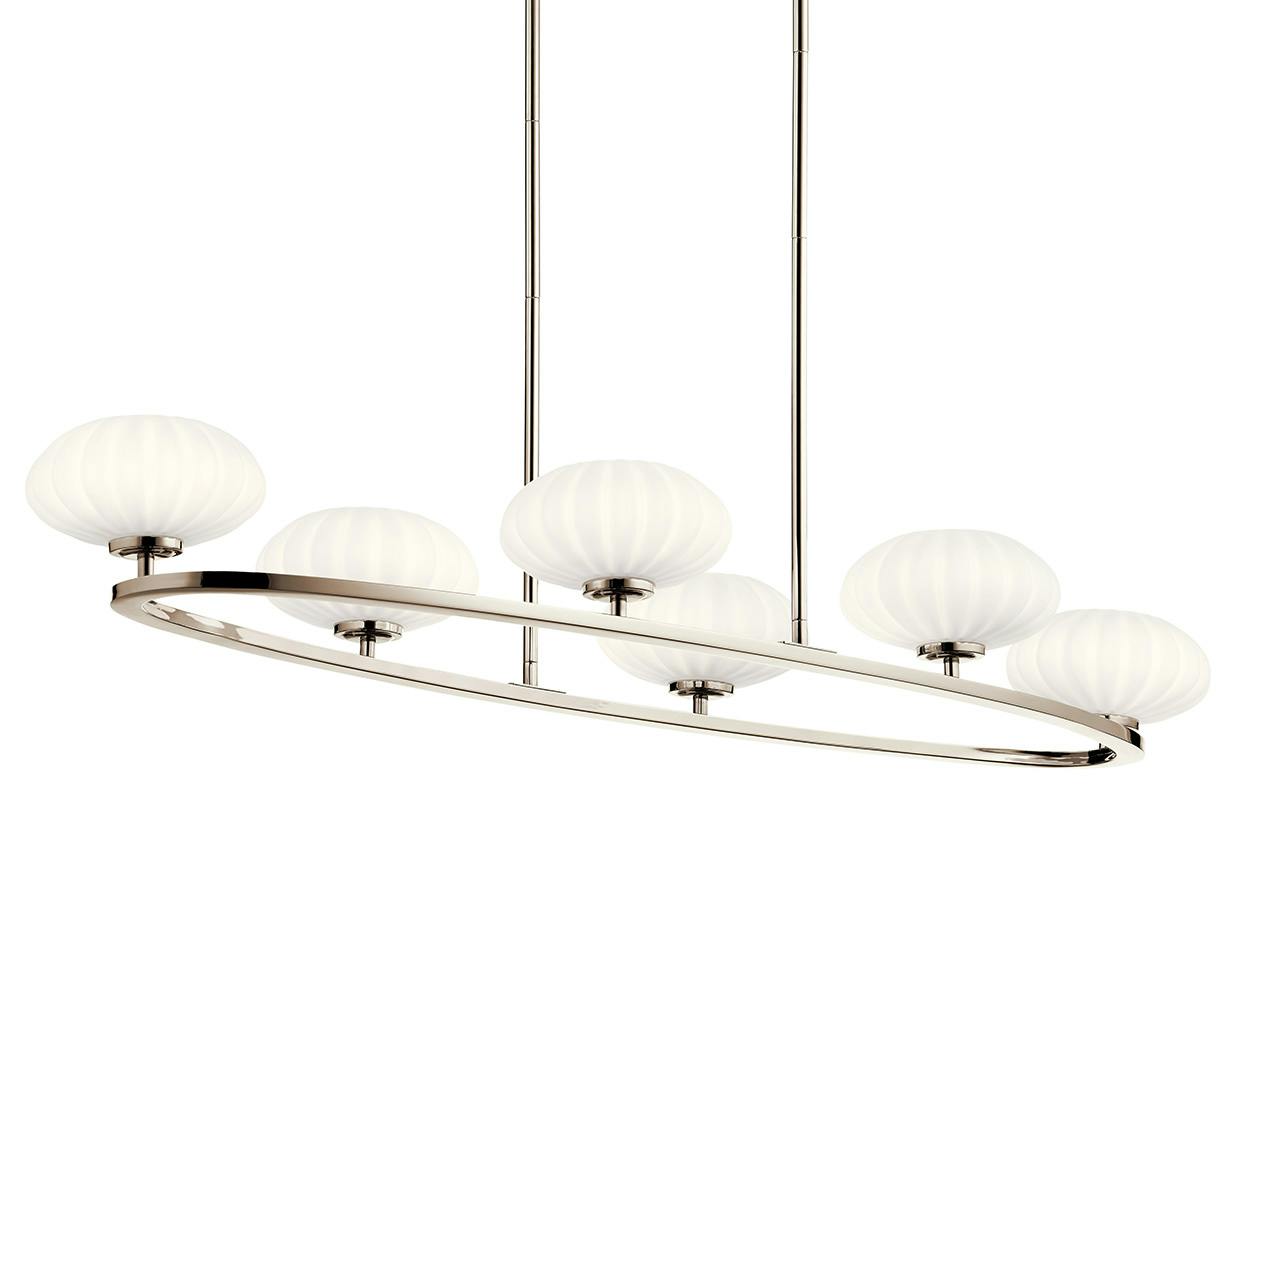 Pim 39" 6 Light Oval Chandelier in Nickel without the canopy on a white background